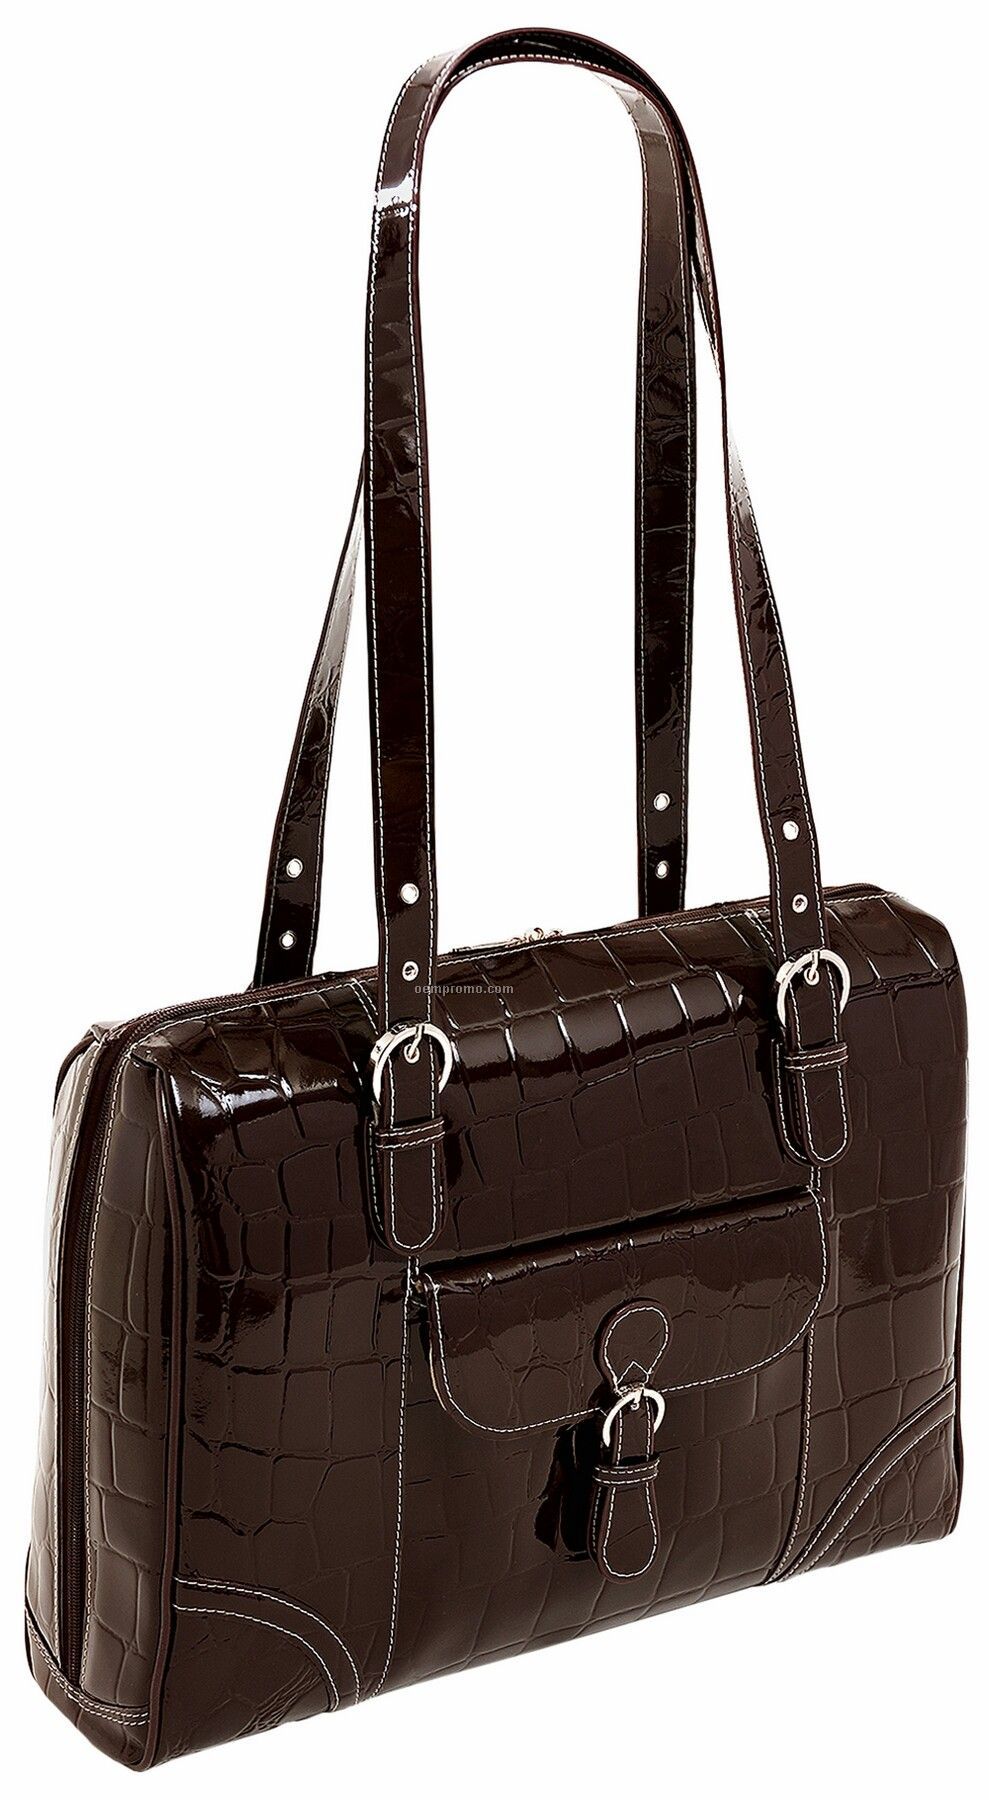 Molinelli Leather Ladies' Laptop Tote - Chocolate Brown